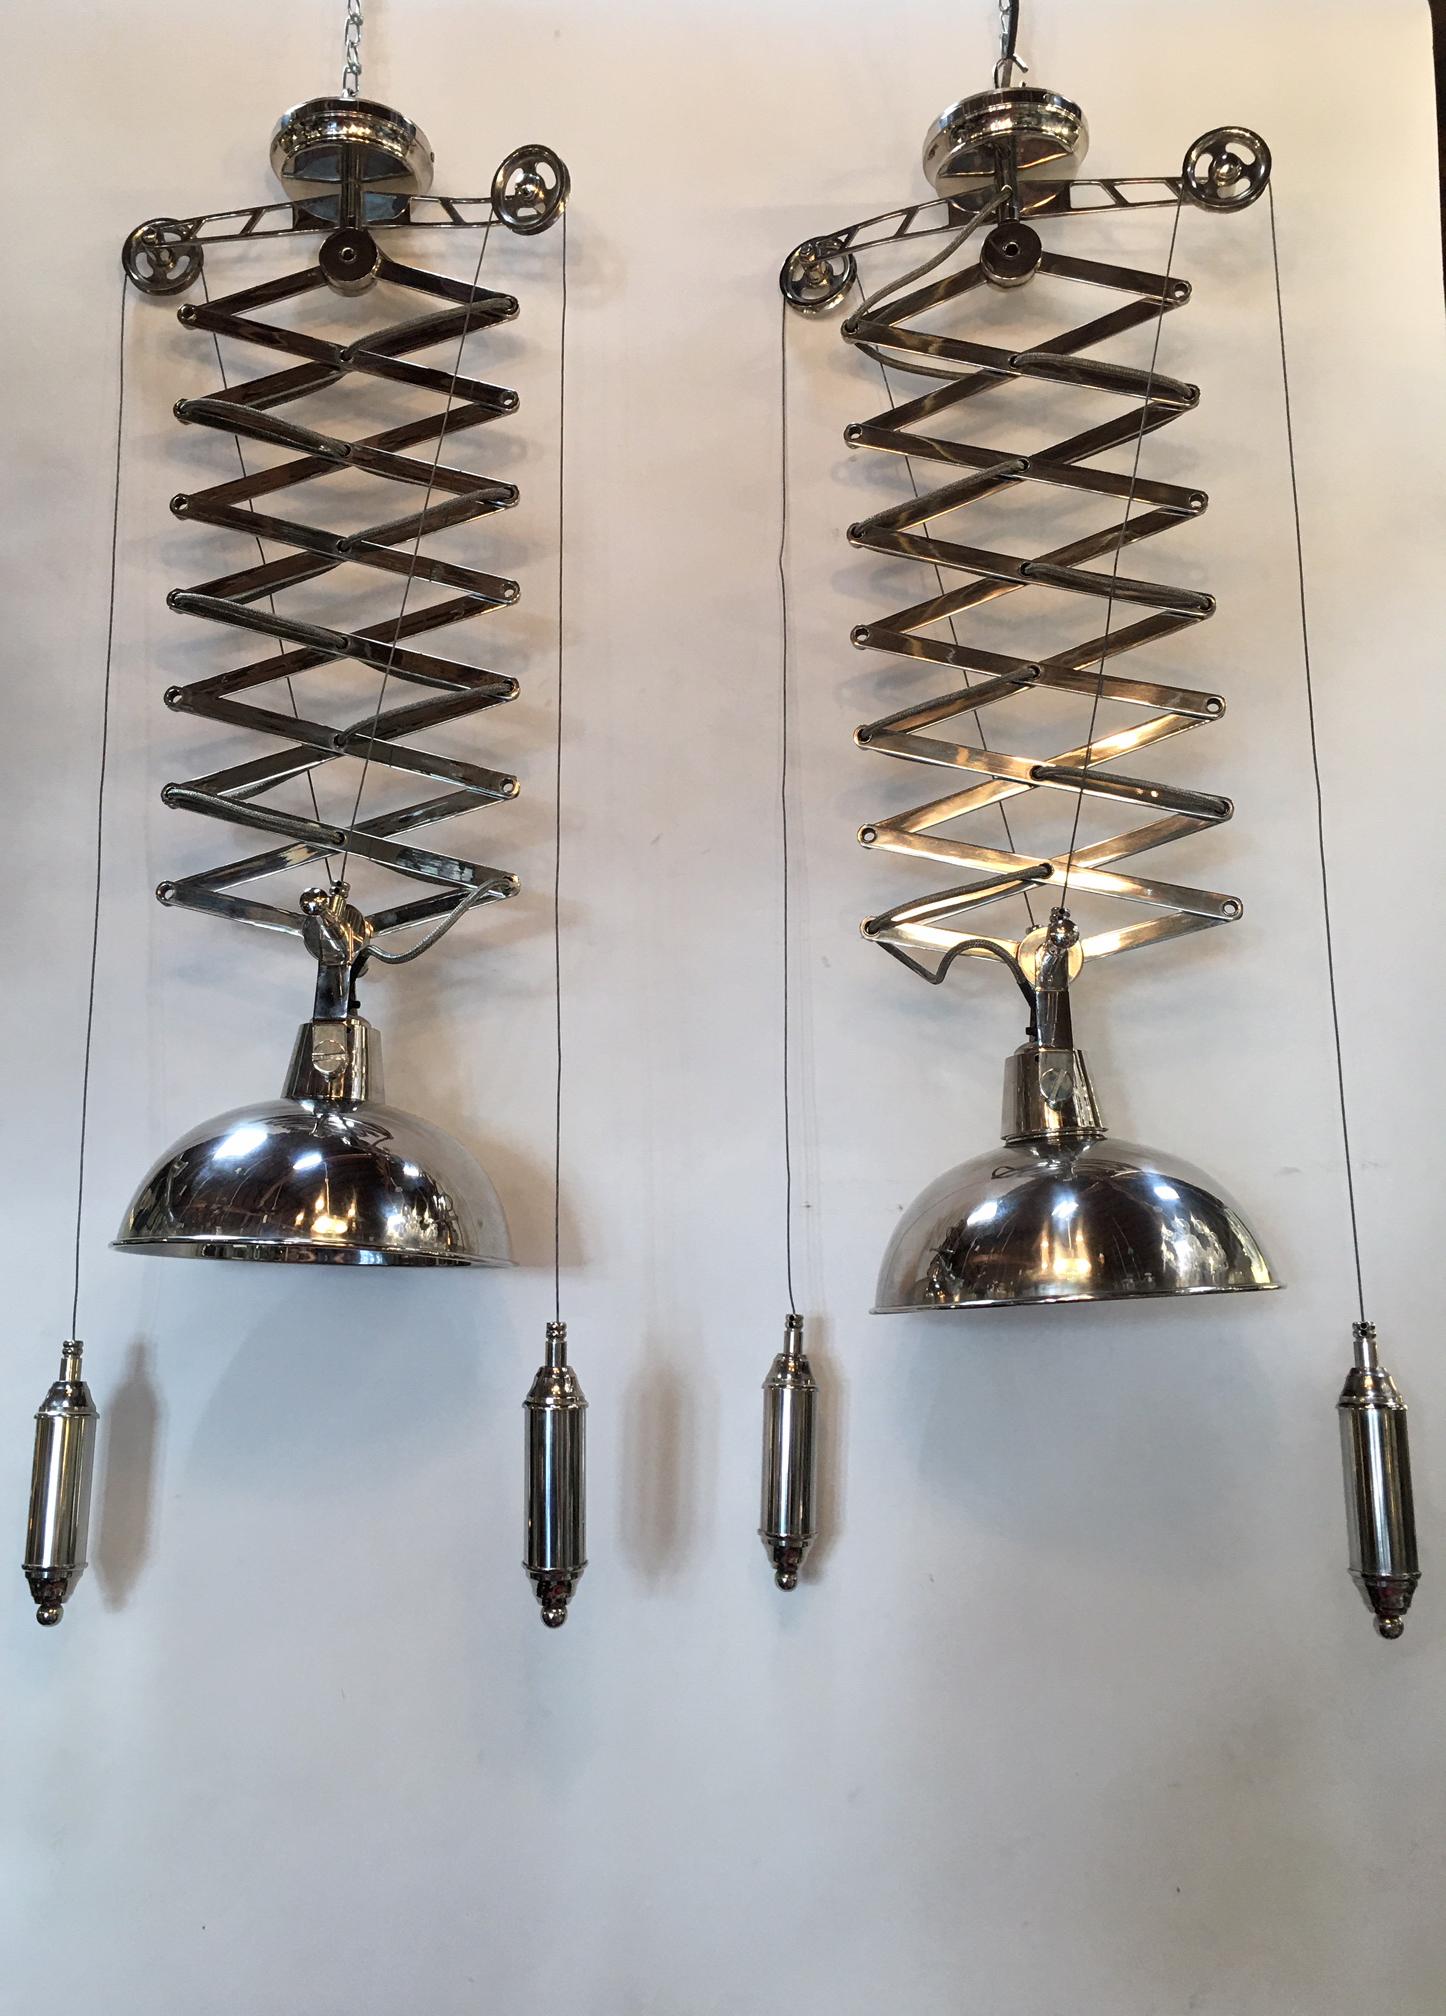 Two polished chrome accordion pendant chandeliers. The pendants can extend to be 67 inches long.